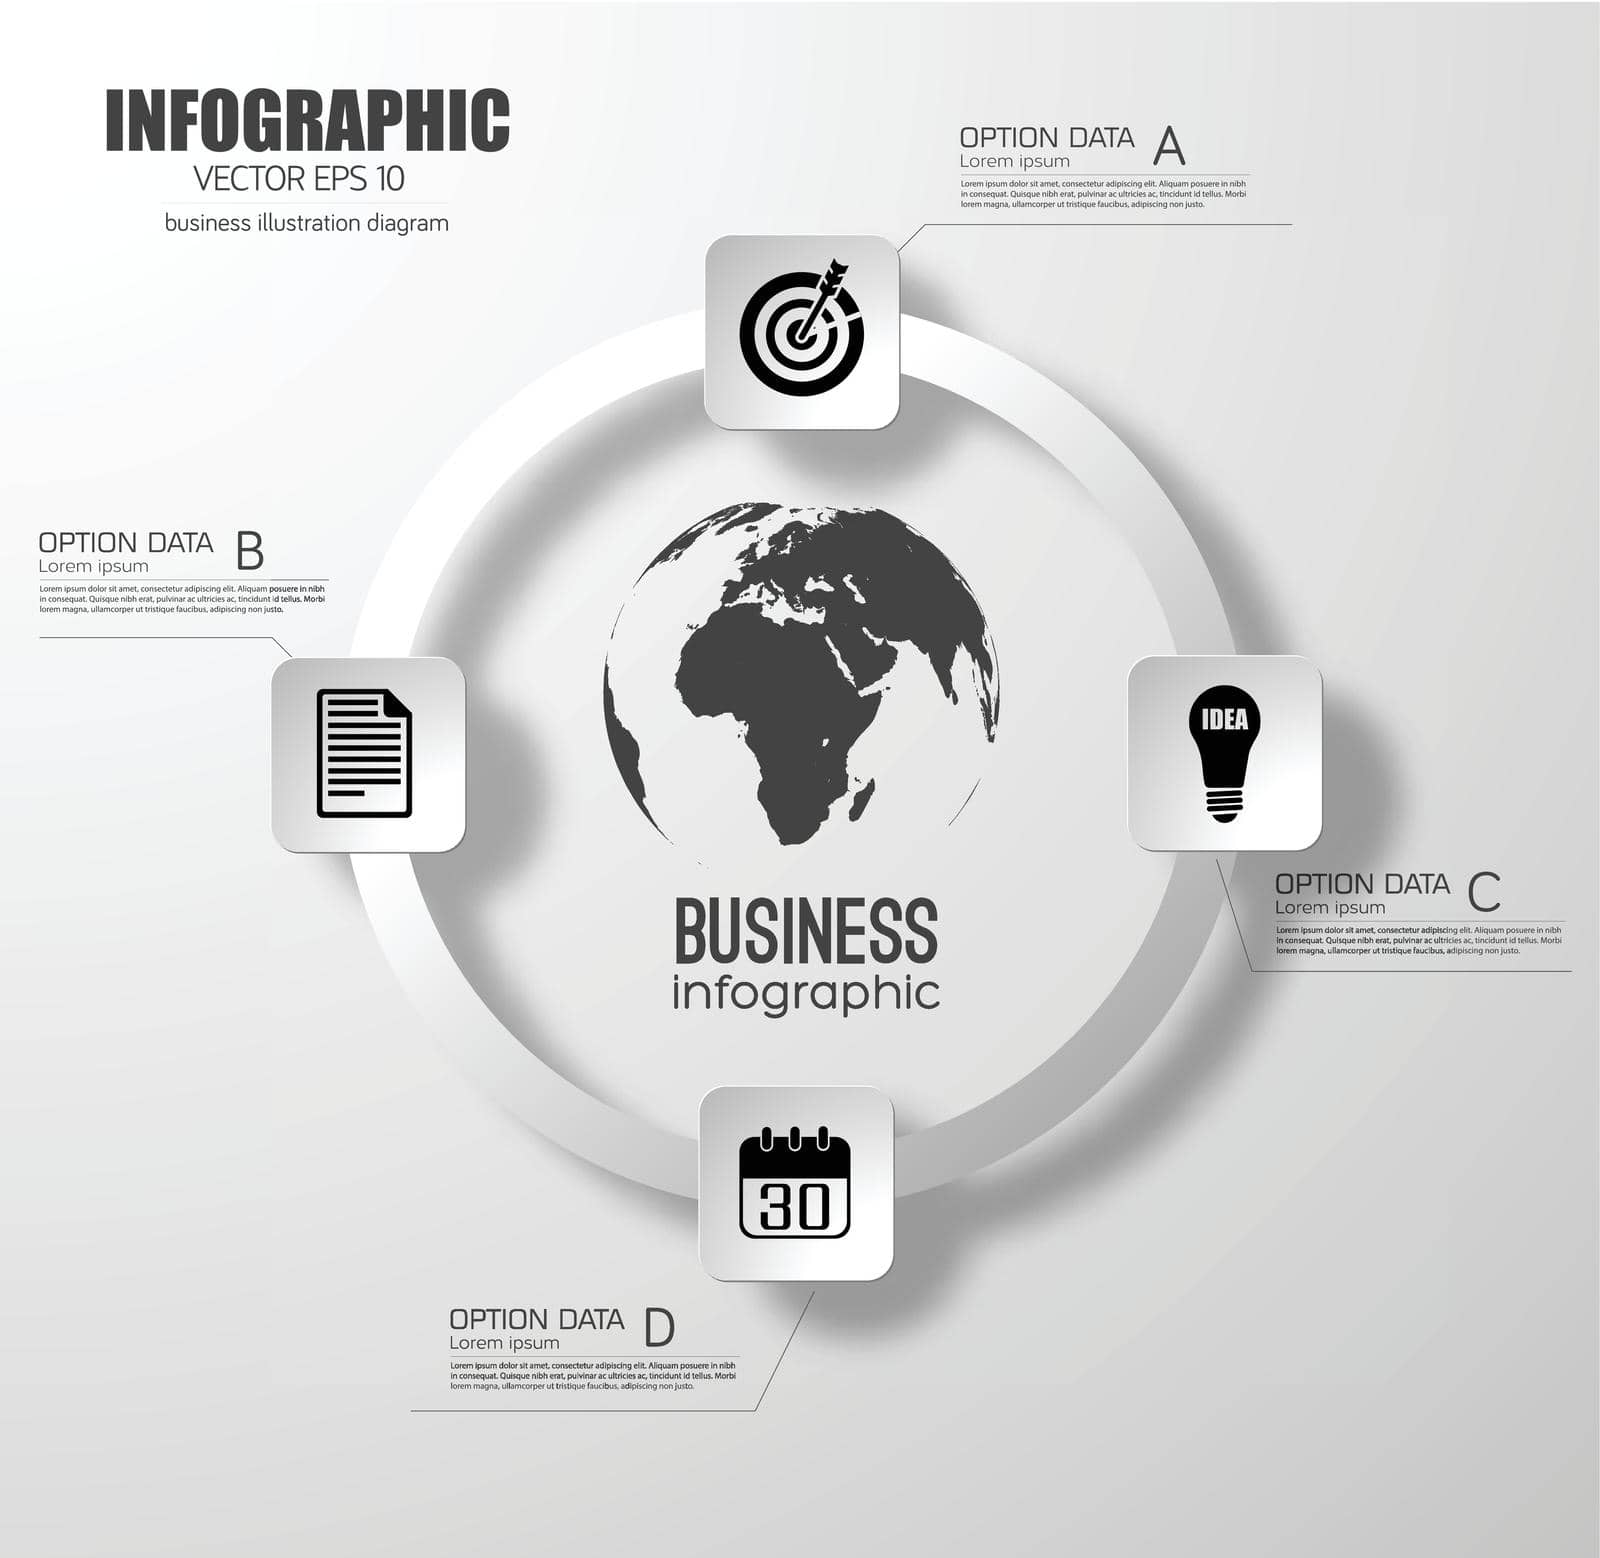 Business infographic design concept with light circle diagram four round squares options and icons vector illustration